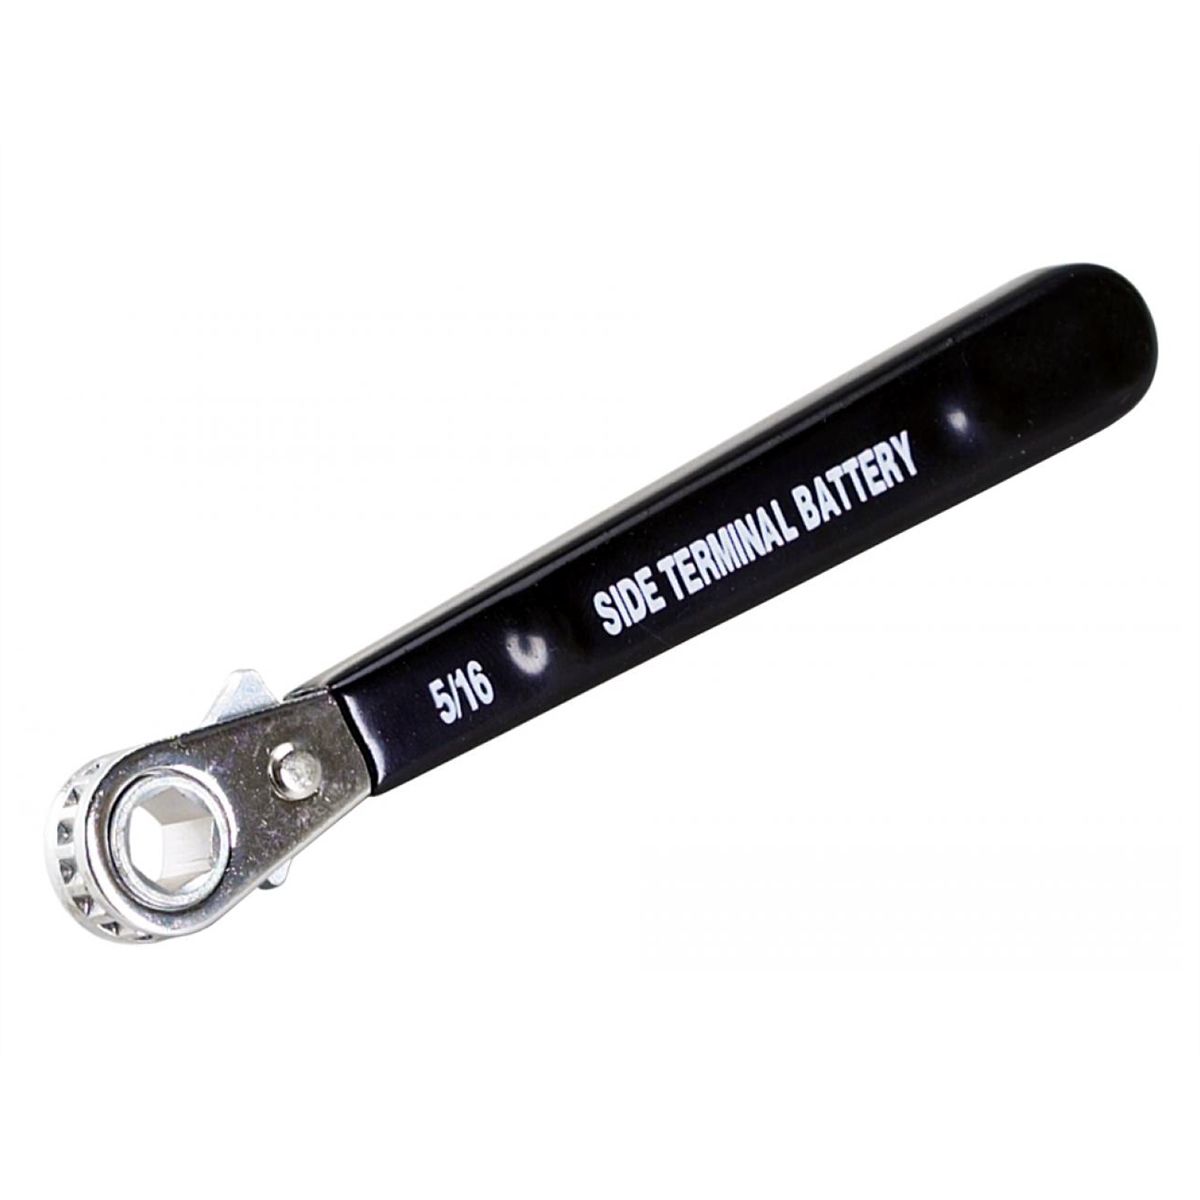 Side-Terminal Battery Wrench